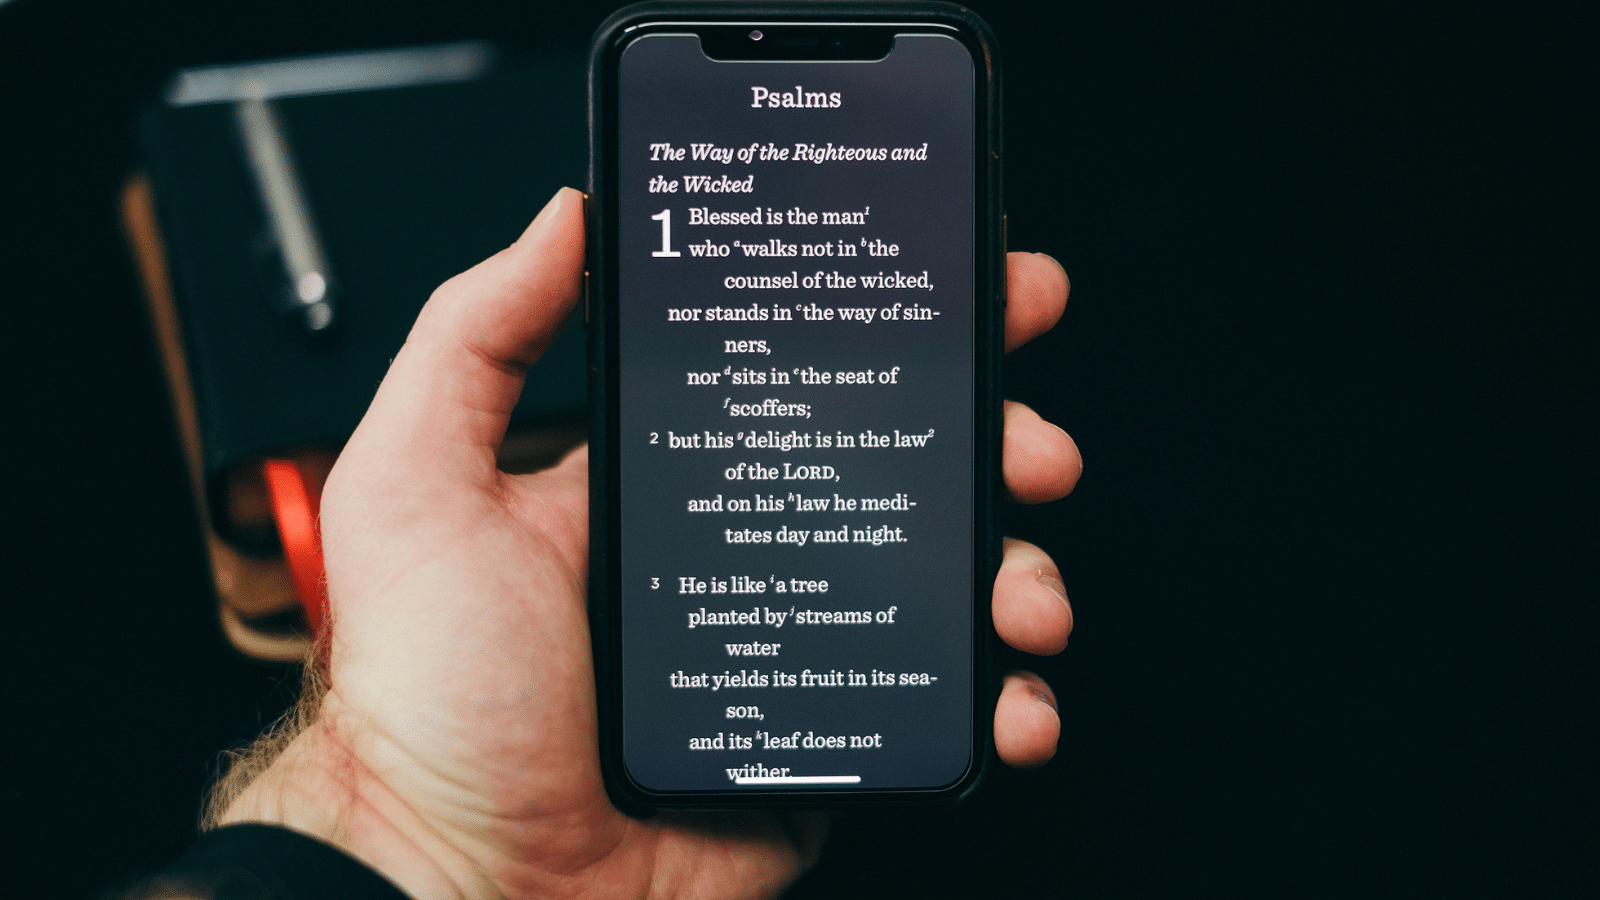 Man's hand holding phone with Bible verses on it